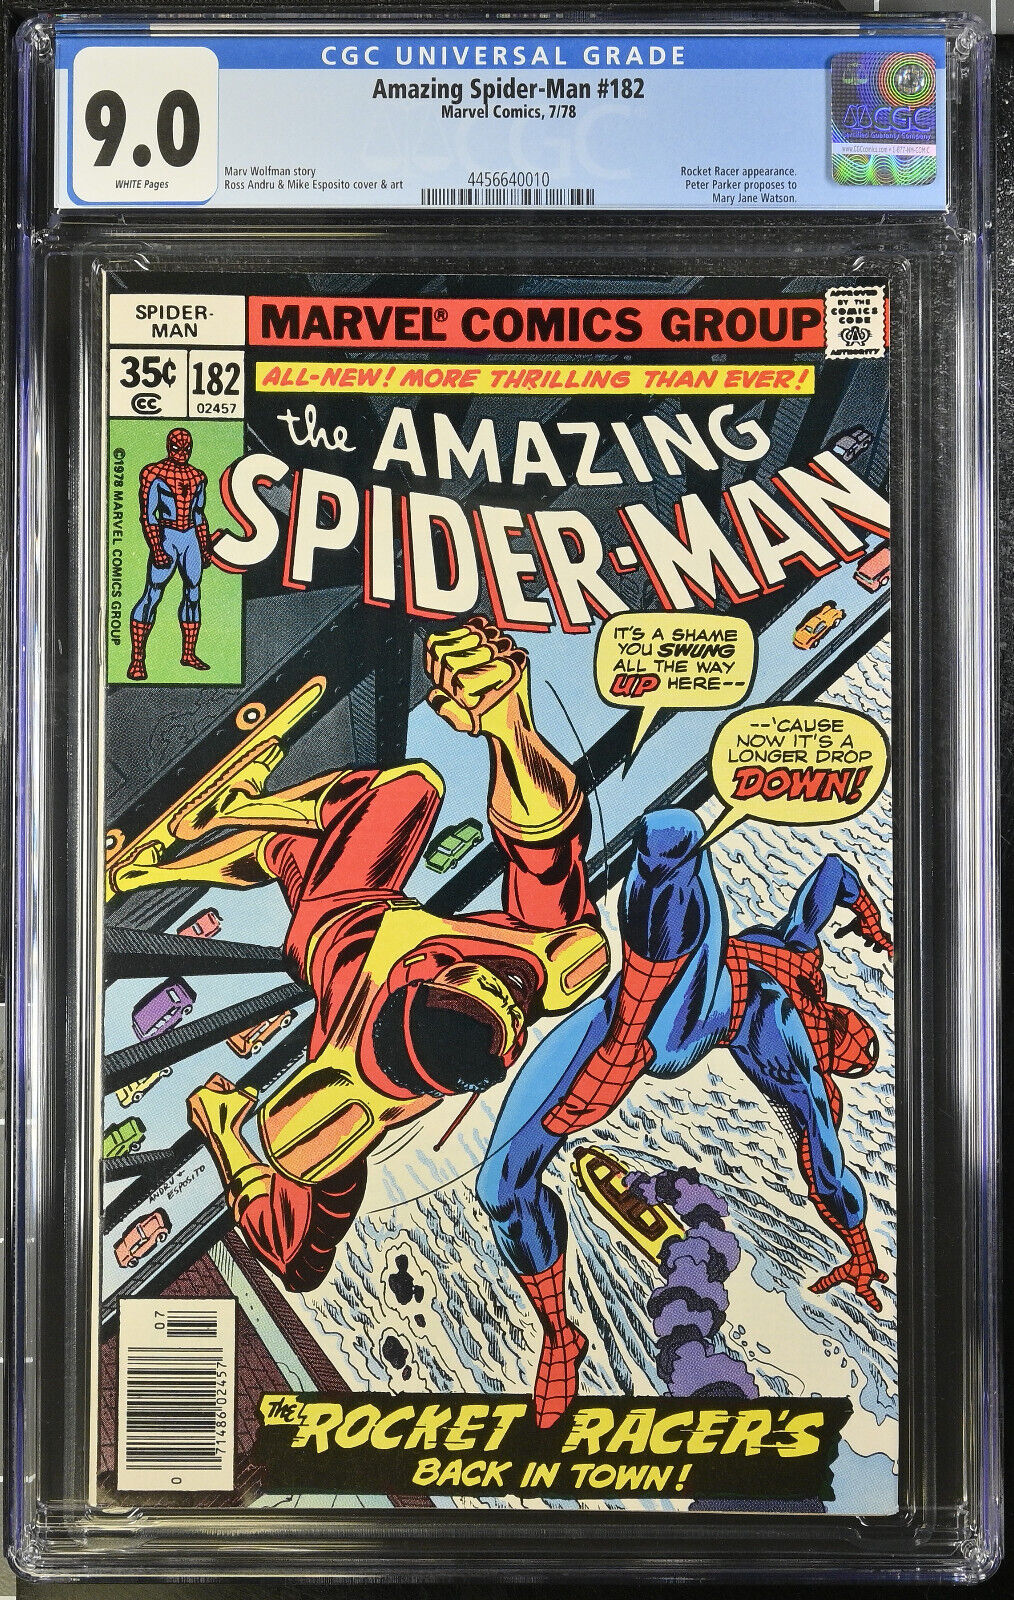 Amazing Spider-Man #182 CGC 9.0 White Pages - 1978 - Rocket Racer cover